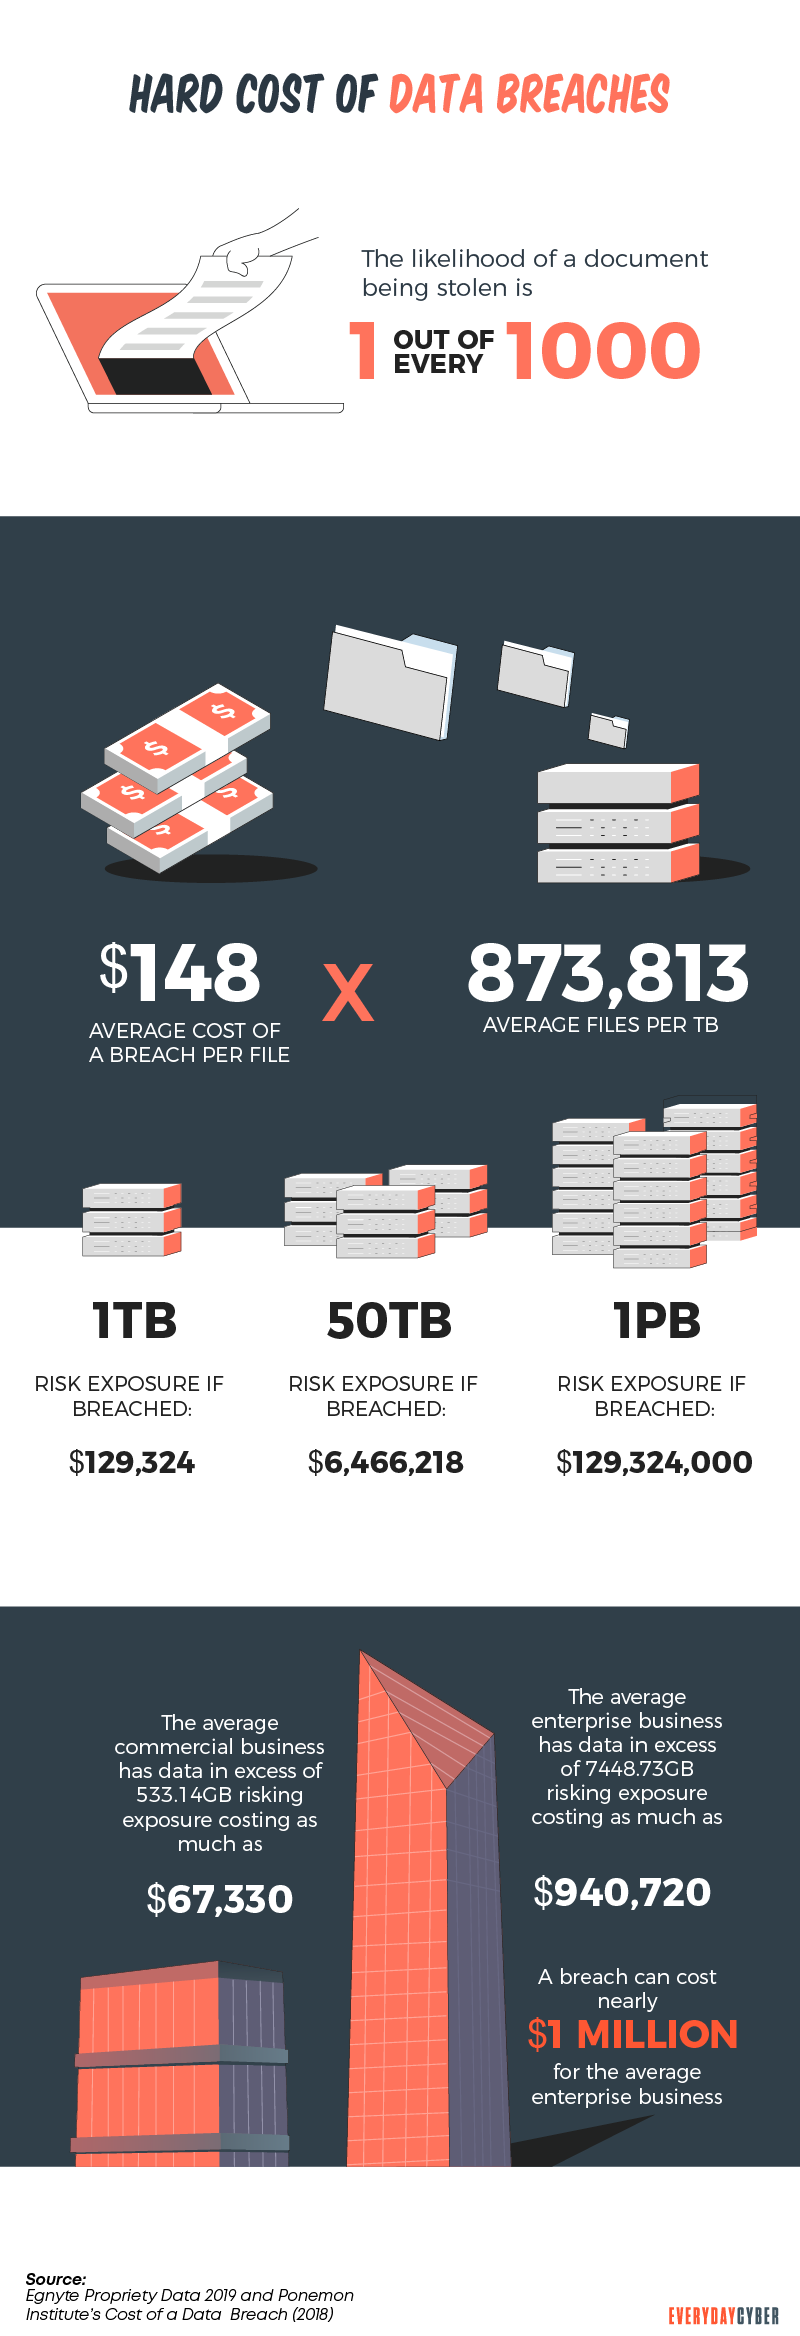 Hard Cost of Data Breaches